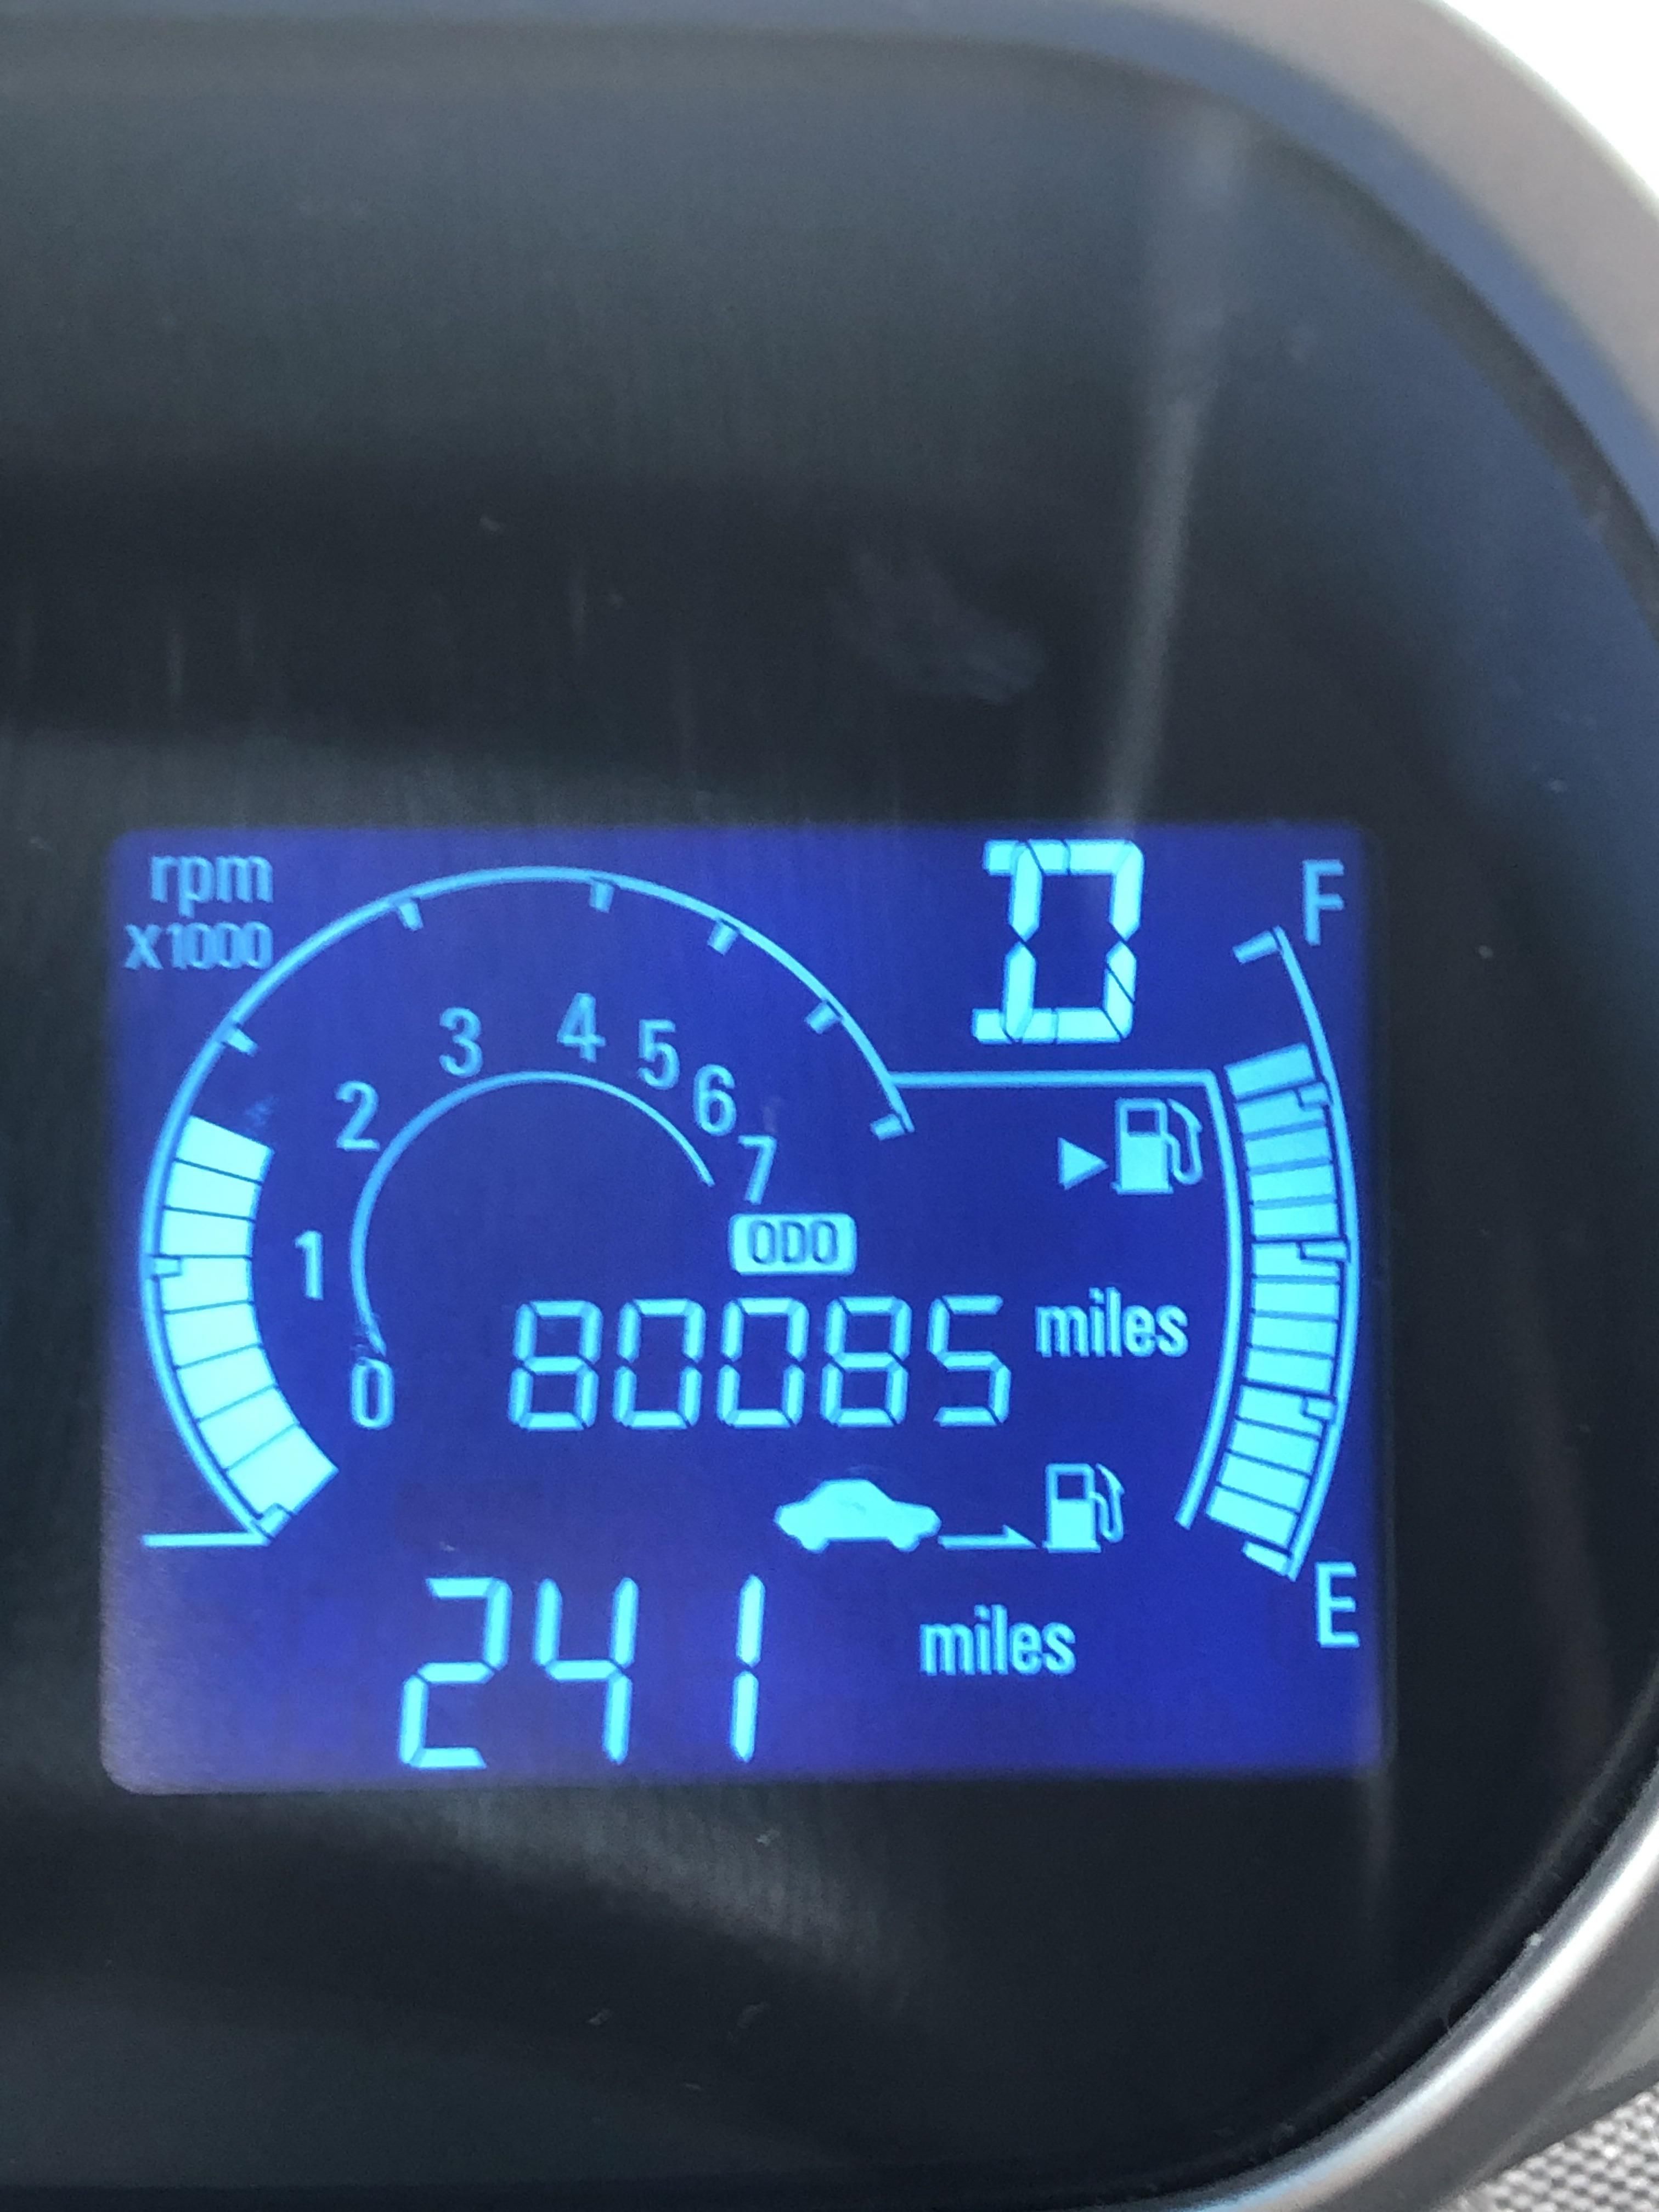 I bought my car in 2013 with one goal in mind and one goal only. Today I reached that goal. My odometer spelled “BOOBS”